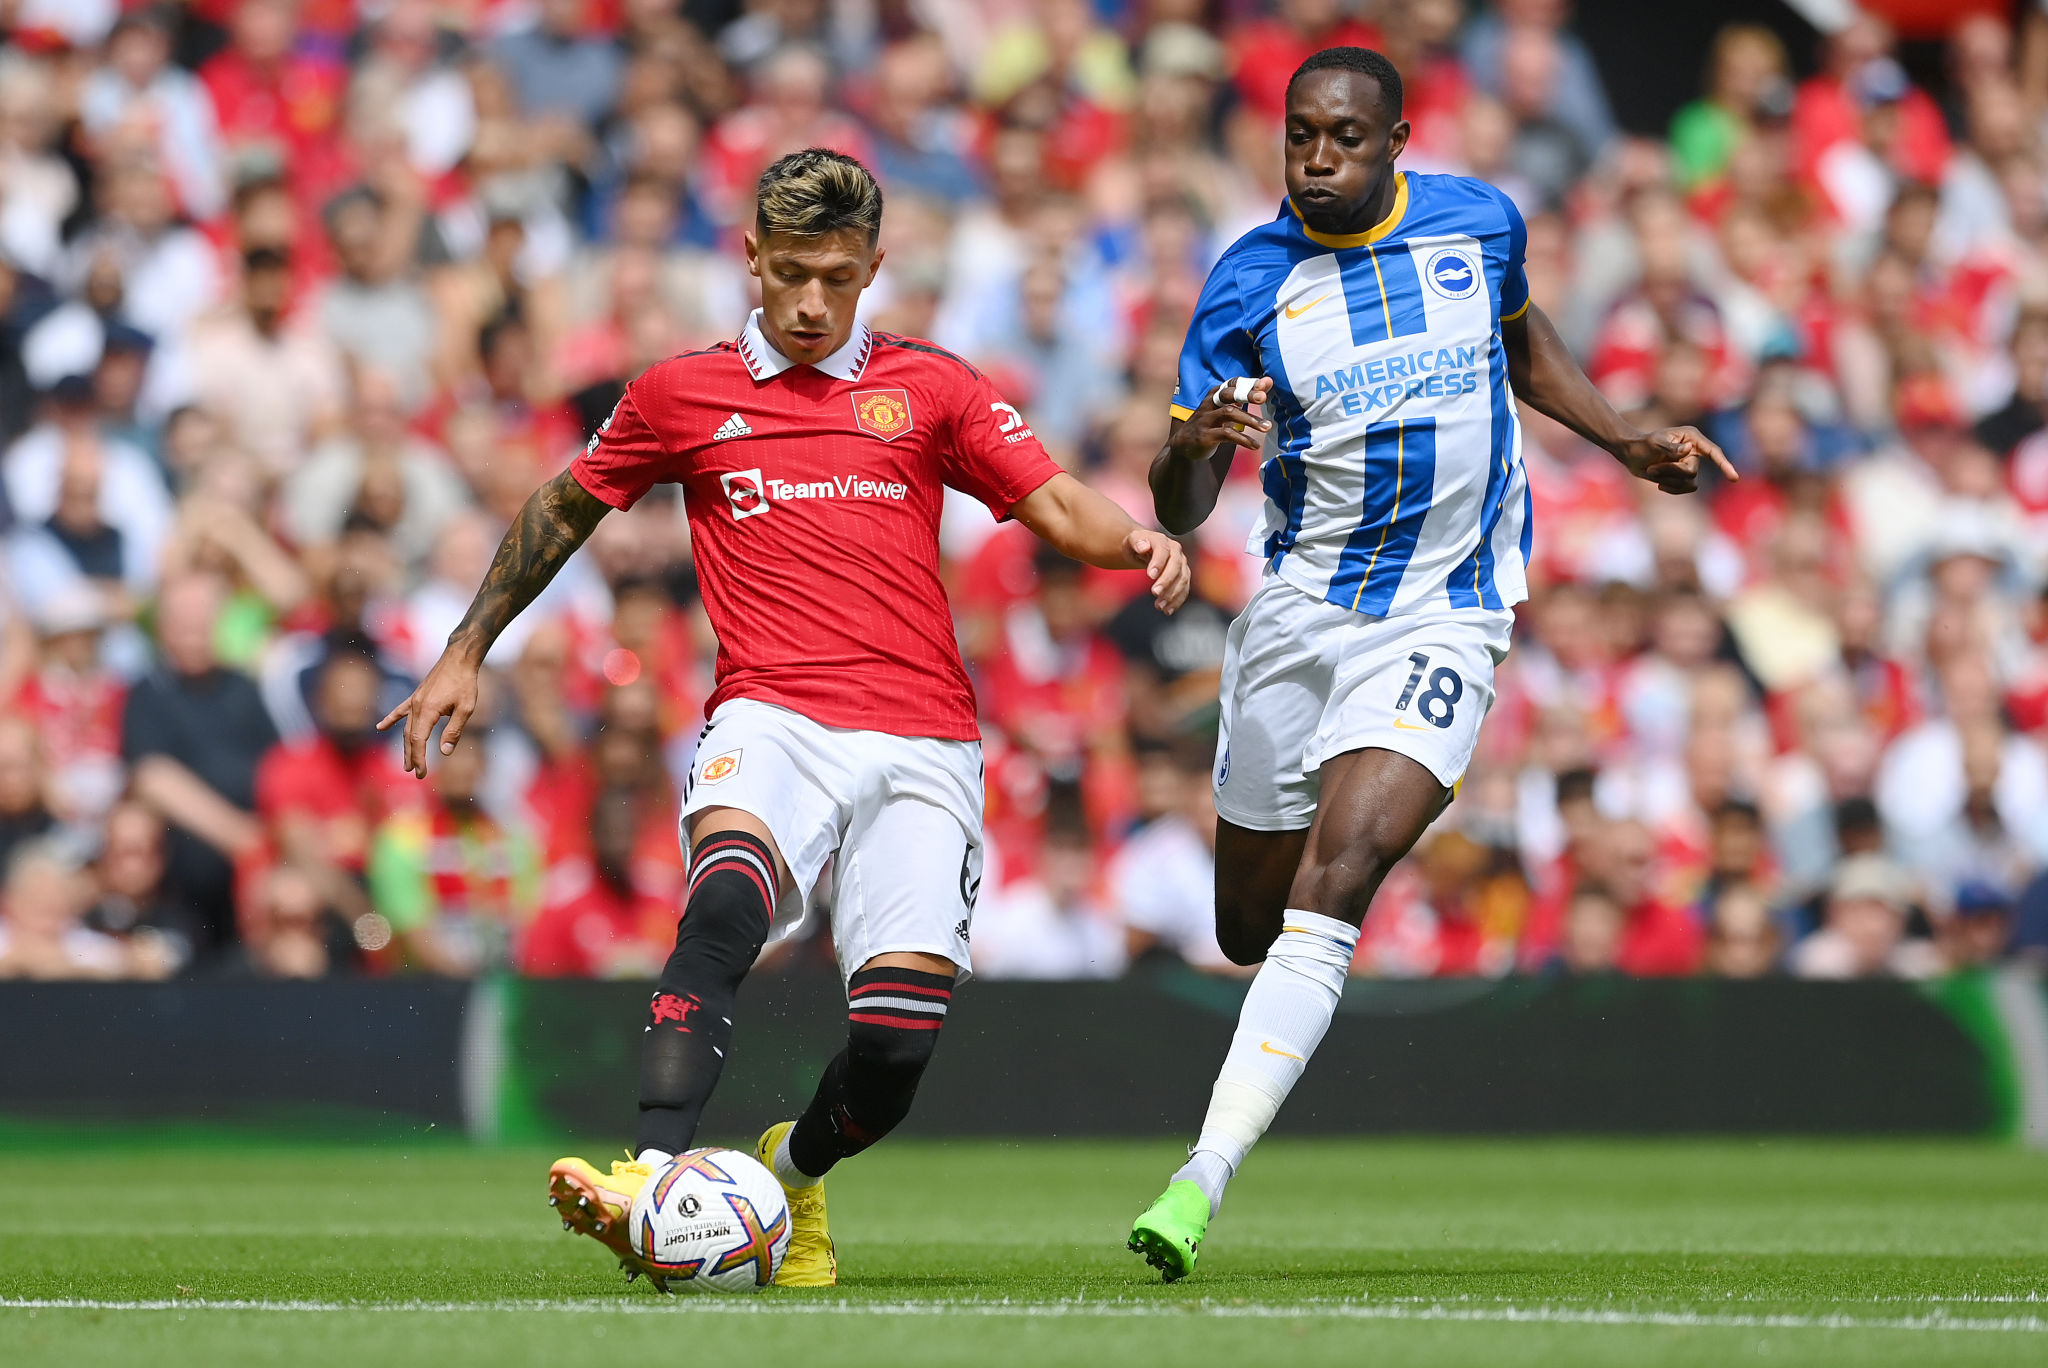 Manchester United vs Brighton Highlights: MUN 1-2 BHA, Brighton hand Man United a 2-1 defeat in Erik ten Hag's first game in charge, Check Brighton Hove & Albion beat Man United HIGHLIGHTS